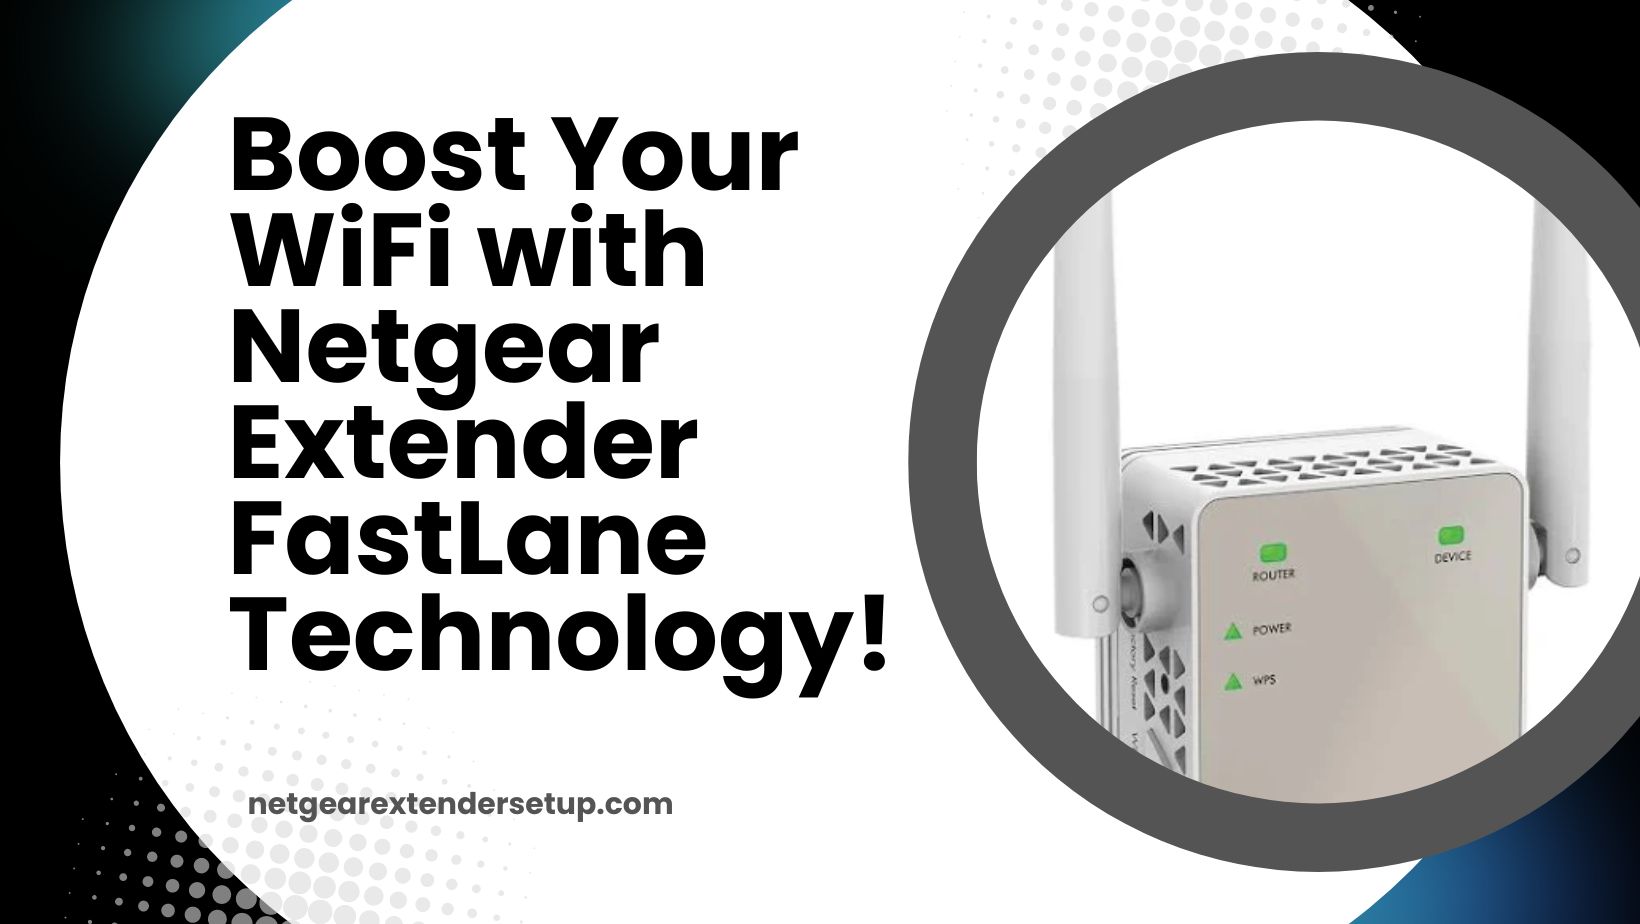 You are currently viewing Boost Your WiFi with Netgear Extender FastLane Technology!